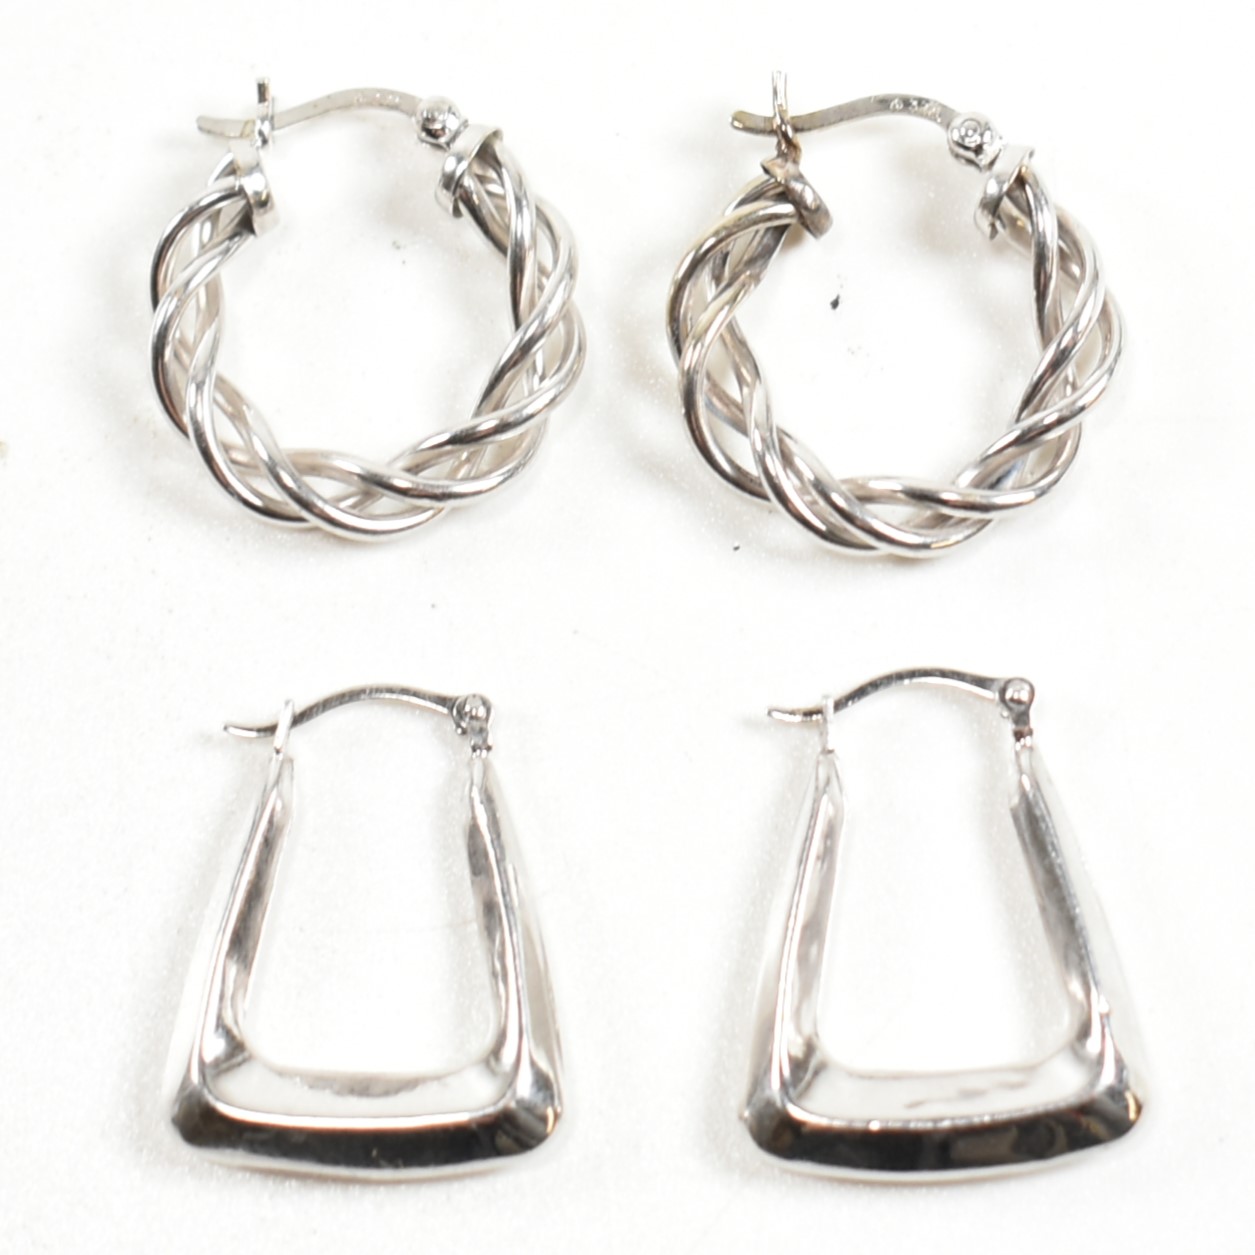 TWO PAIRS OF 9CT WHITE GOLD HOOP EARRINGS - Image 2 of 6